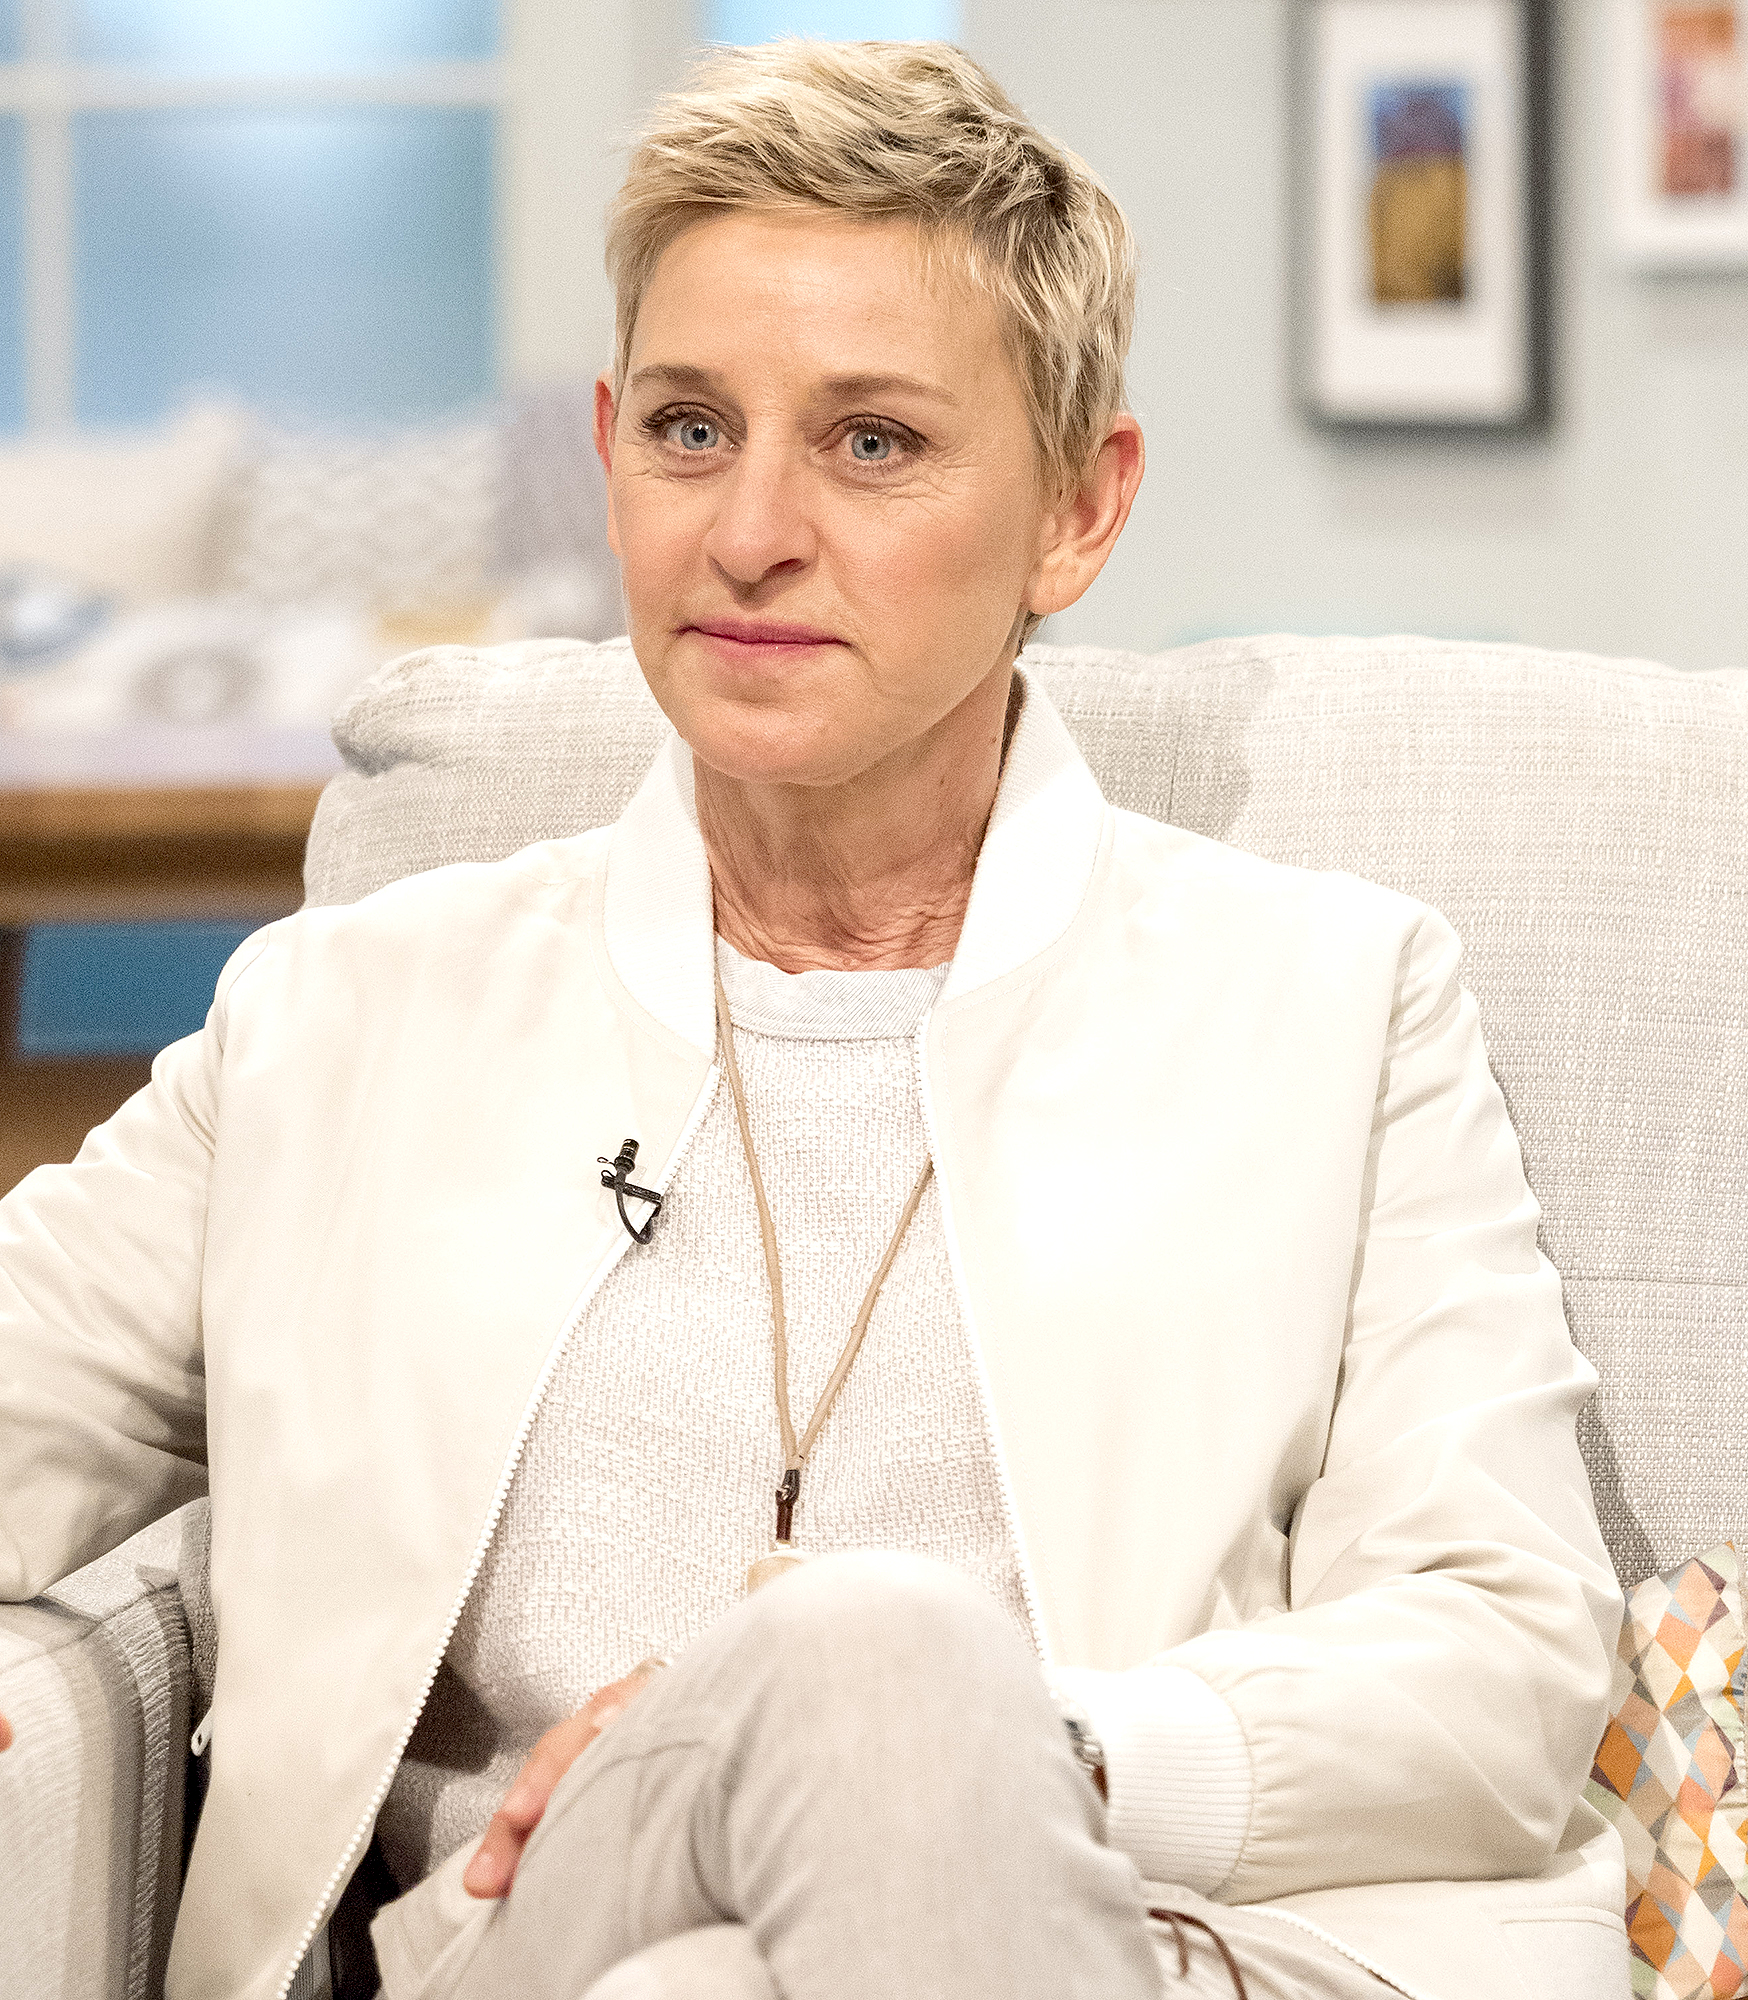 Ellen DeGeneres Most Controversial Moments Over the Years image